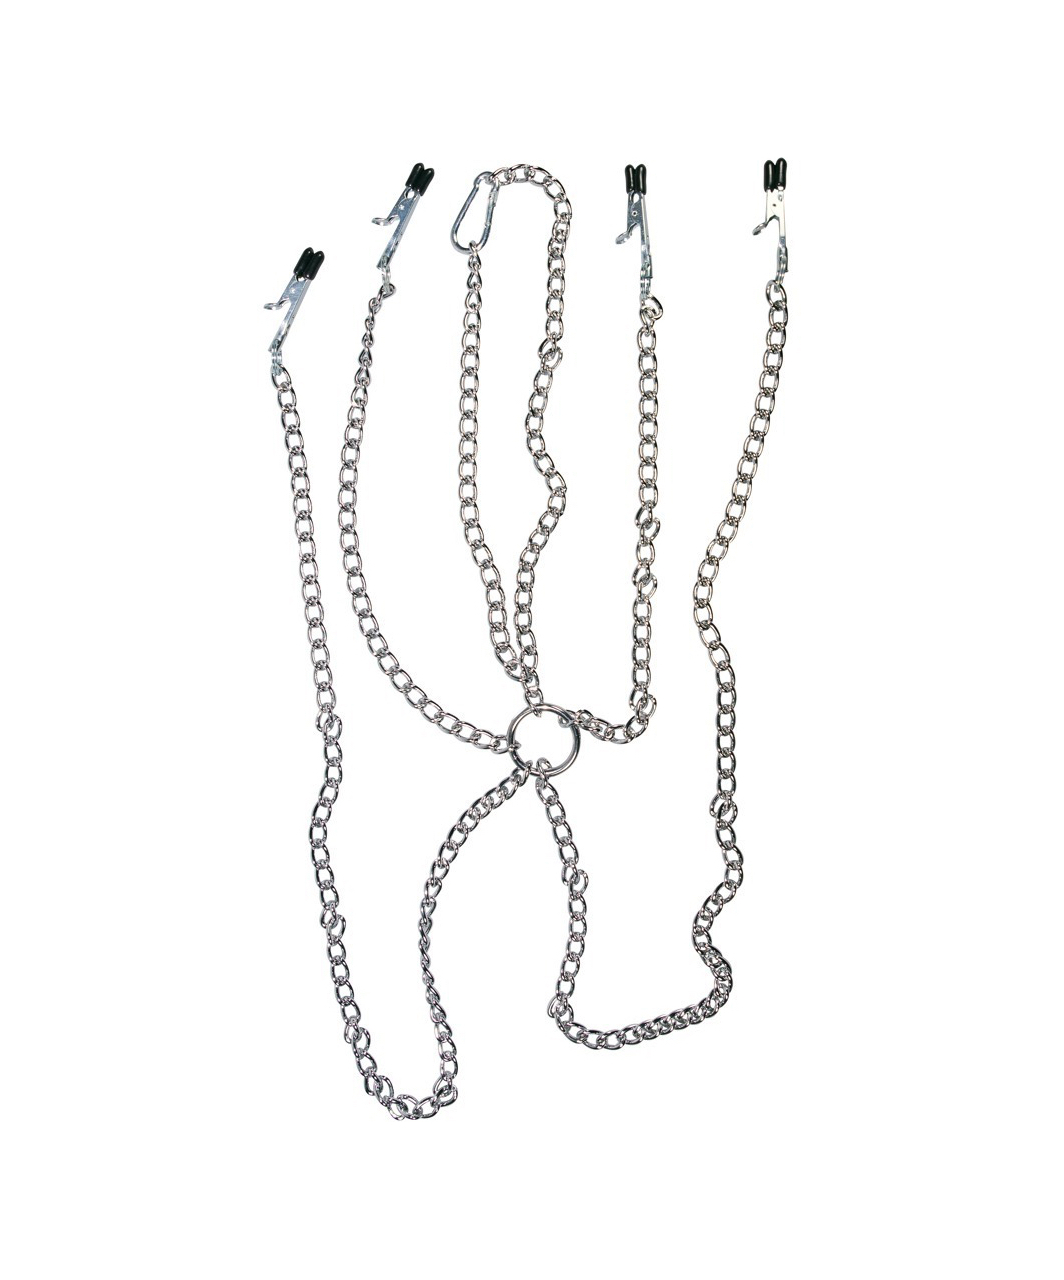 Sextreme chain harness with clamps